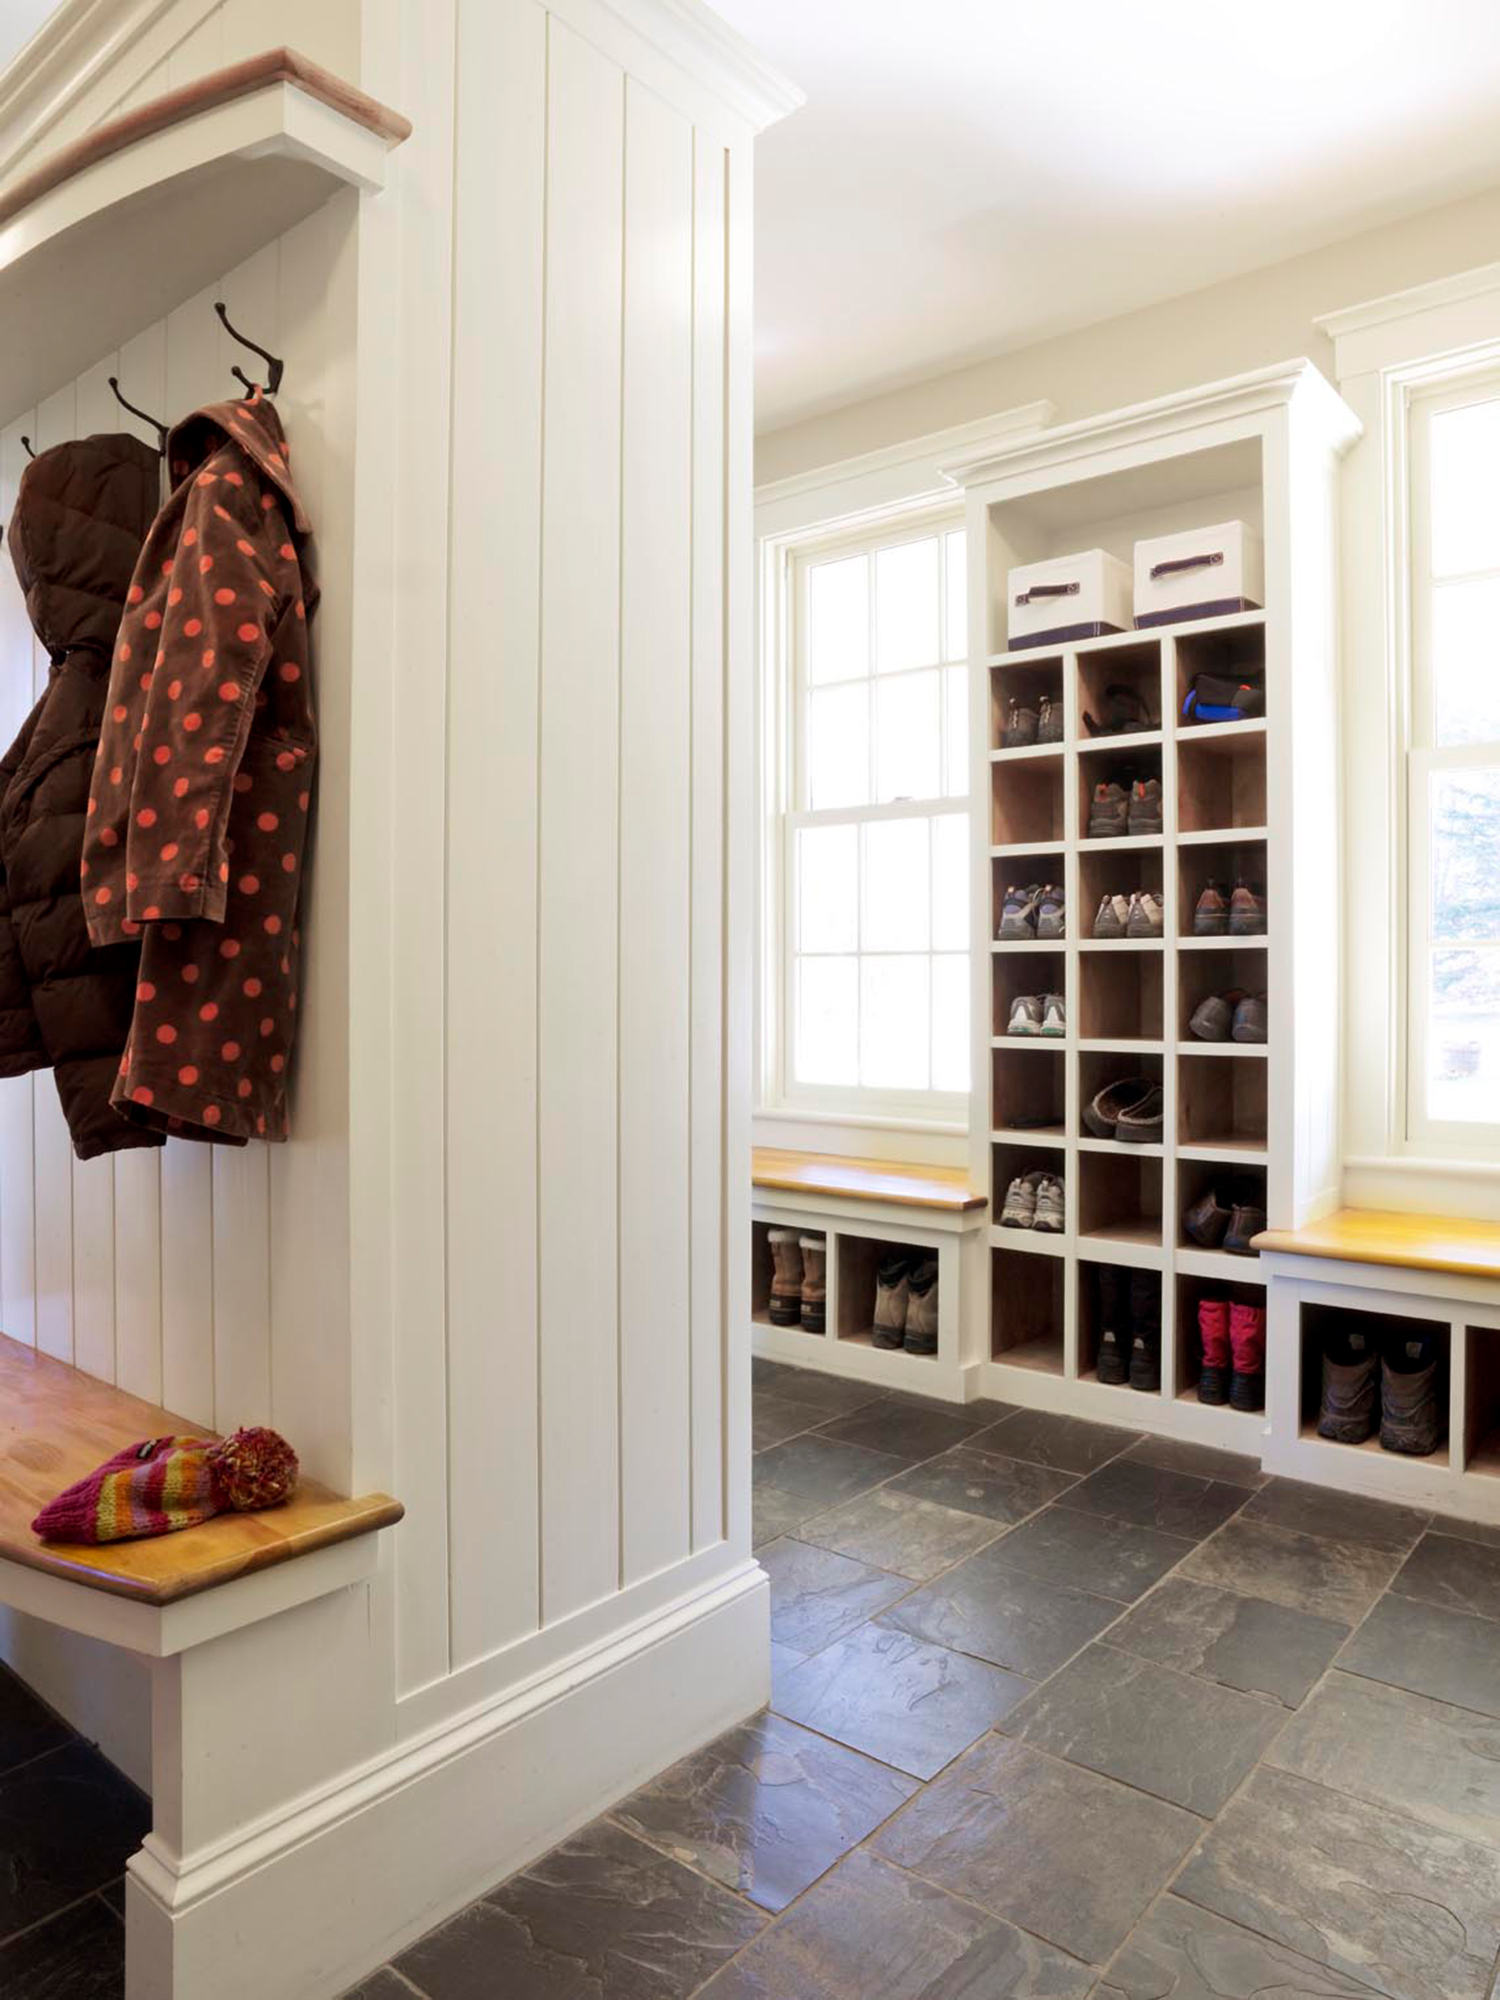 MUD SEASON IN VERMONT: Sharing our 5 favorite mudroom makeovers